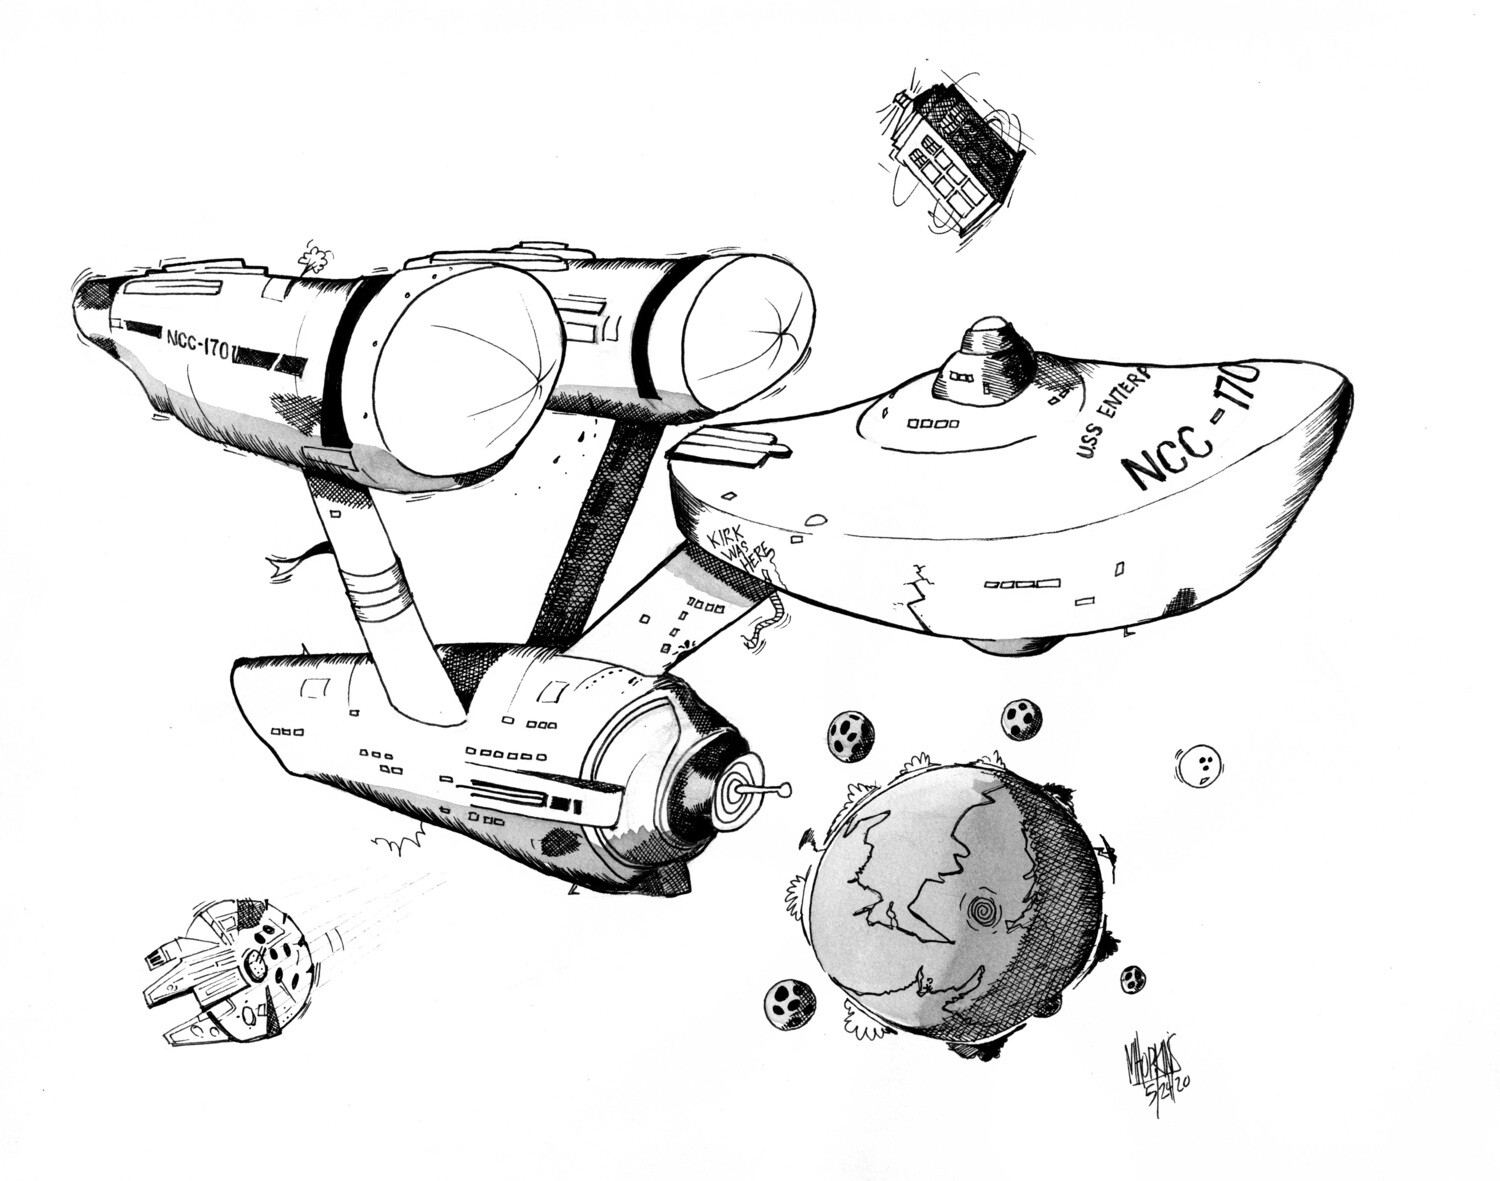 USS Enterprise - Caricature Limited Edition Giclée Prints from $75 to $100